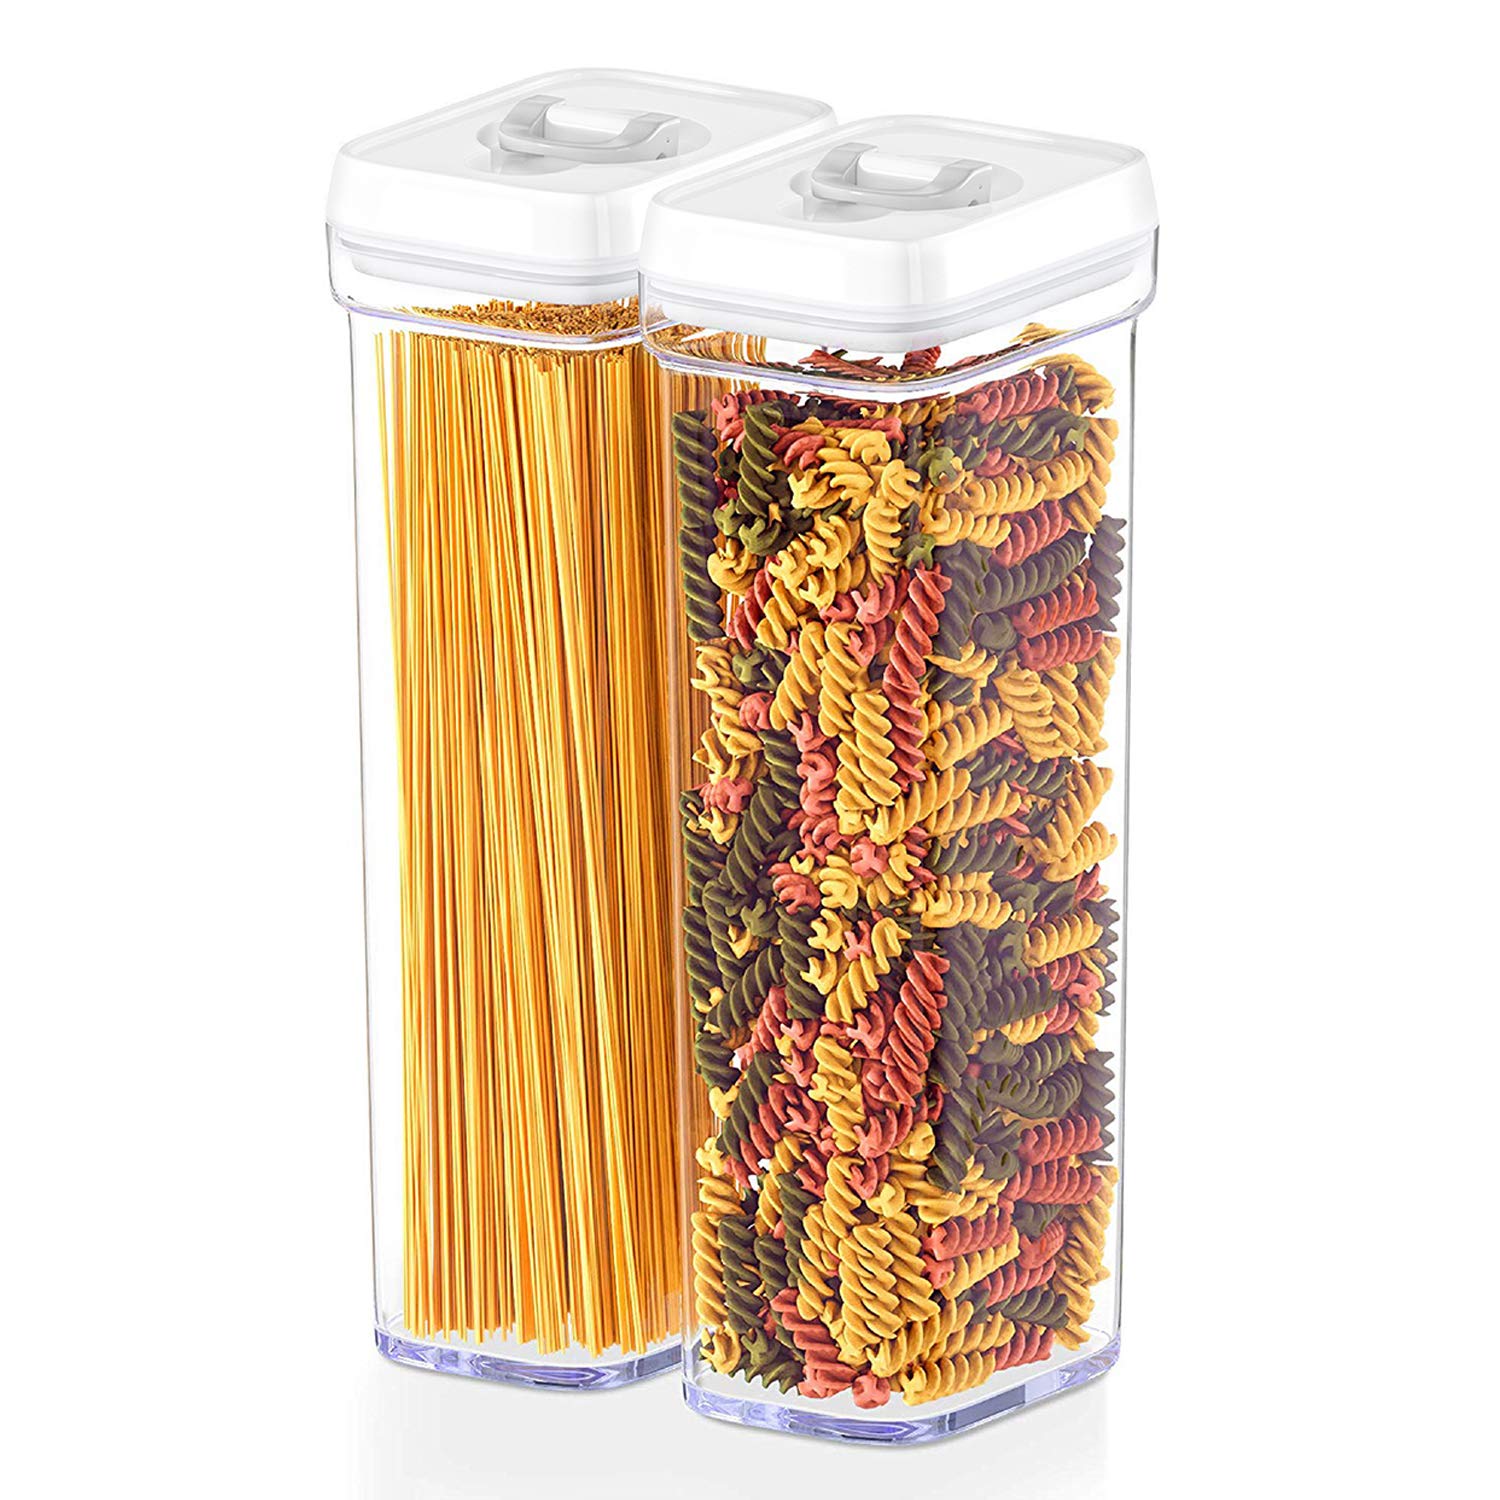 2 Pack of Tall Clear Spaghetti Pasta Storage Container with Lids